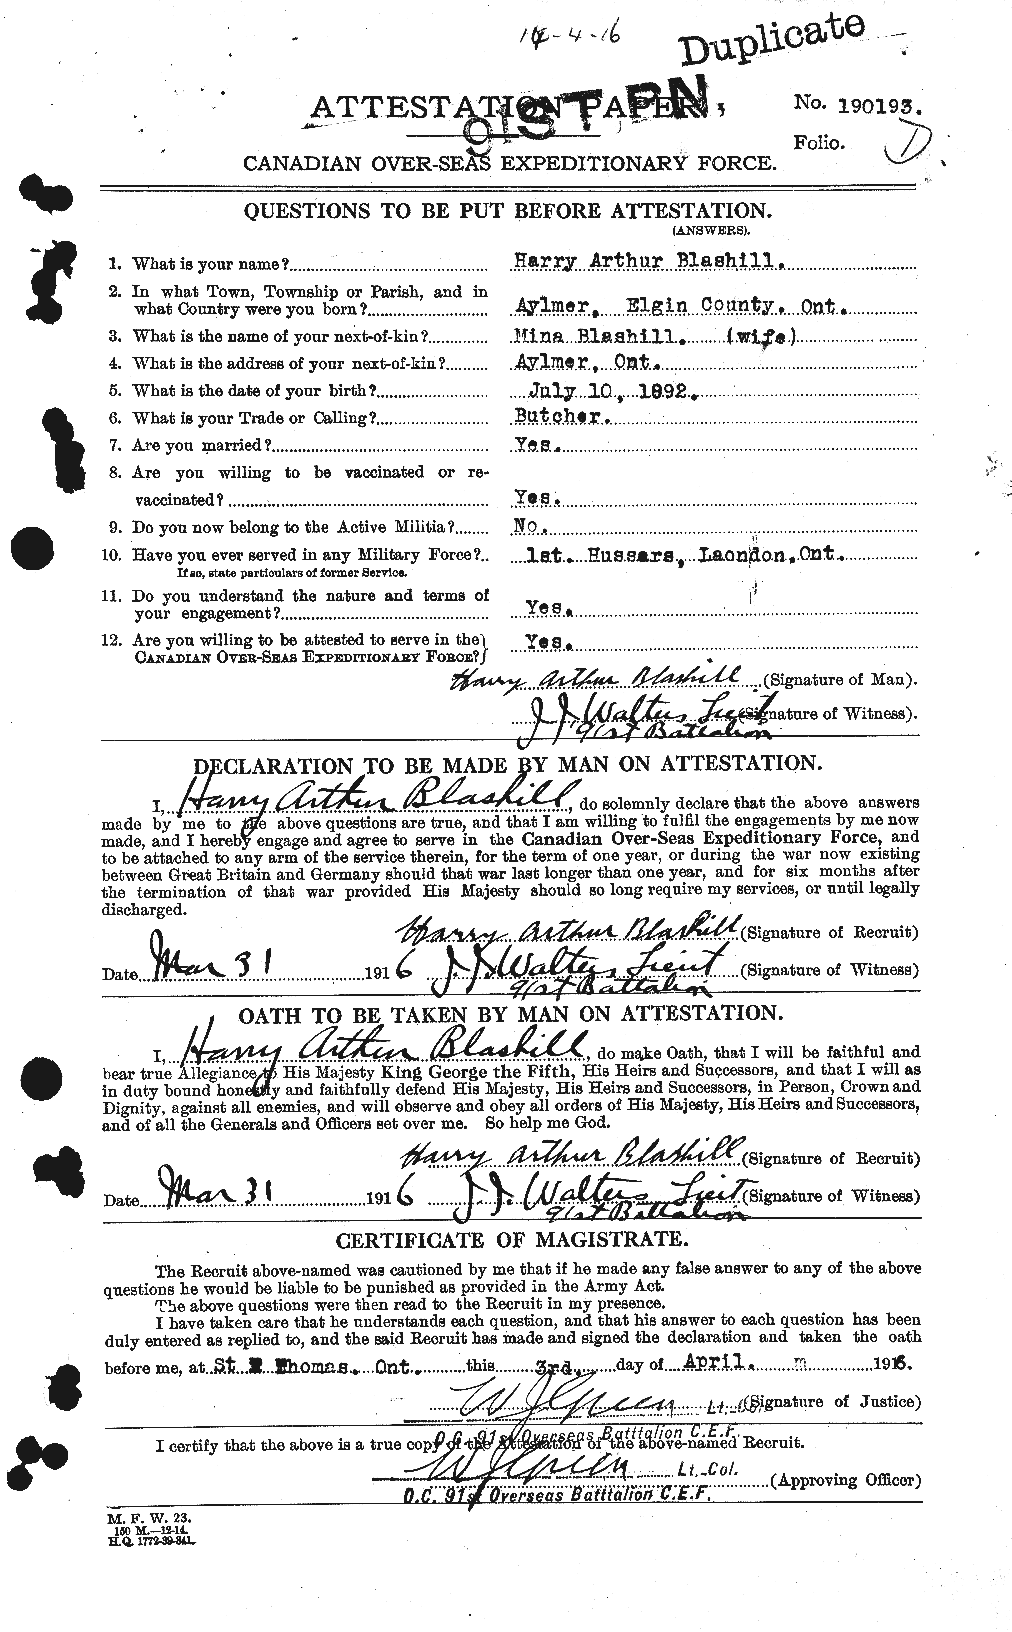 Personnel Records of the First World War - CEF 247780a